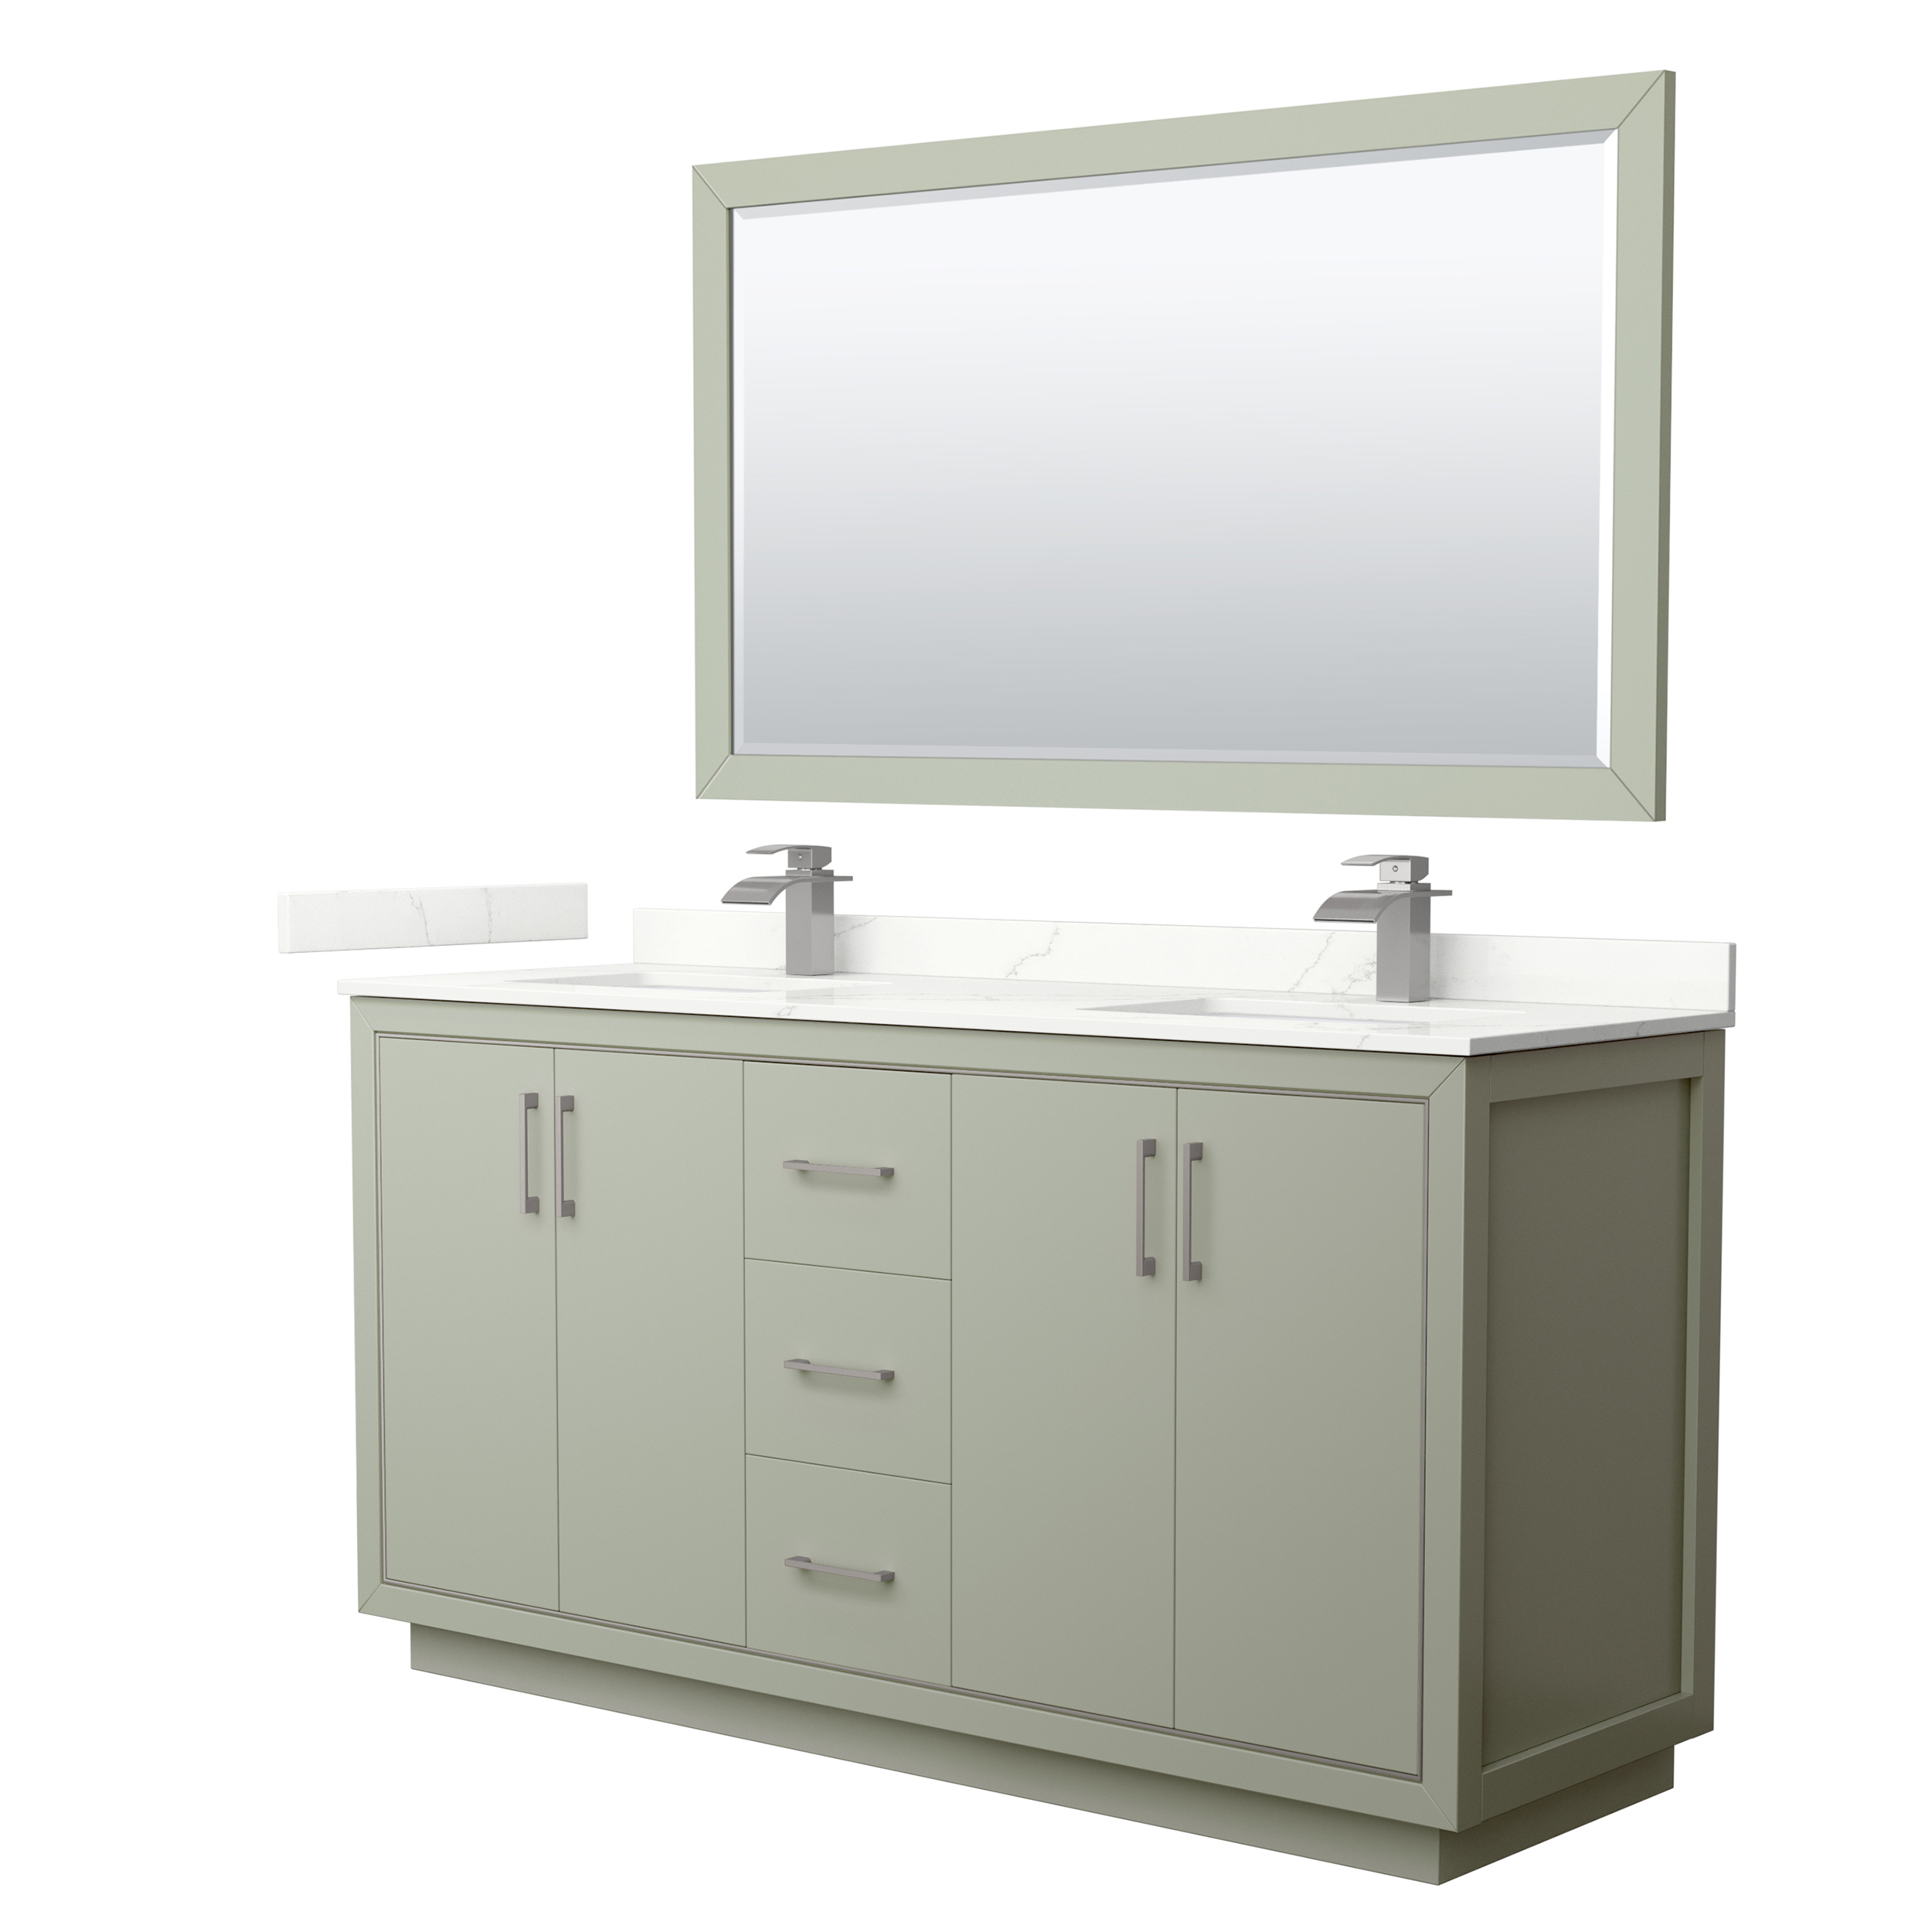 icon 66" double vanity with optional quartz or carrara marble counter - light green